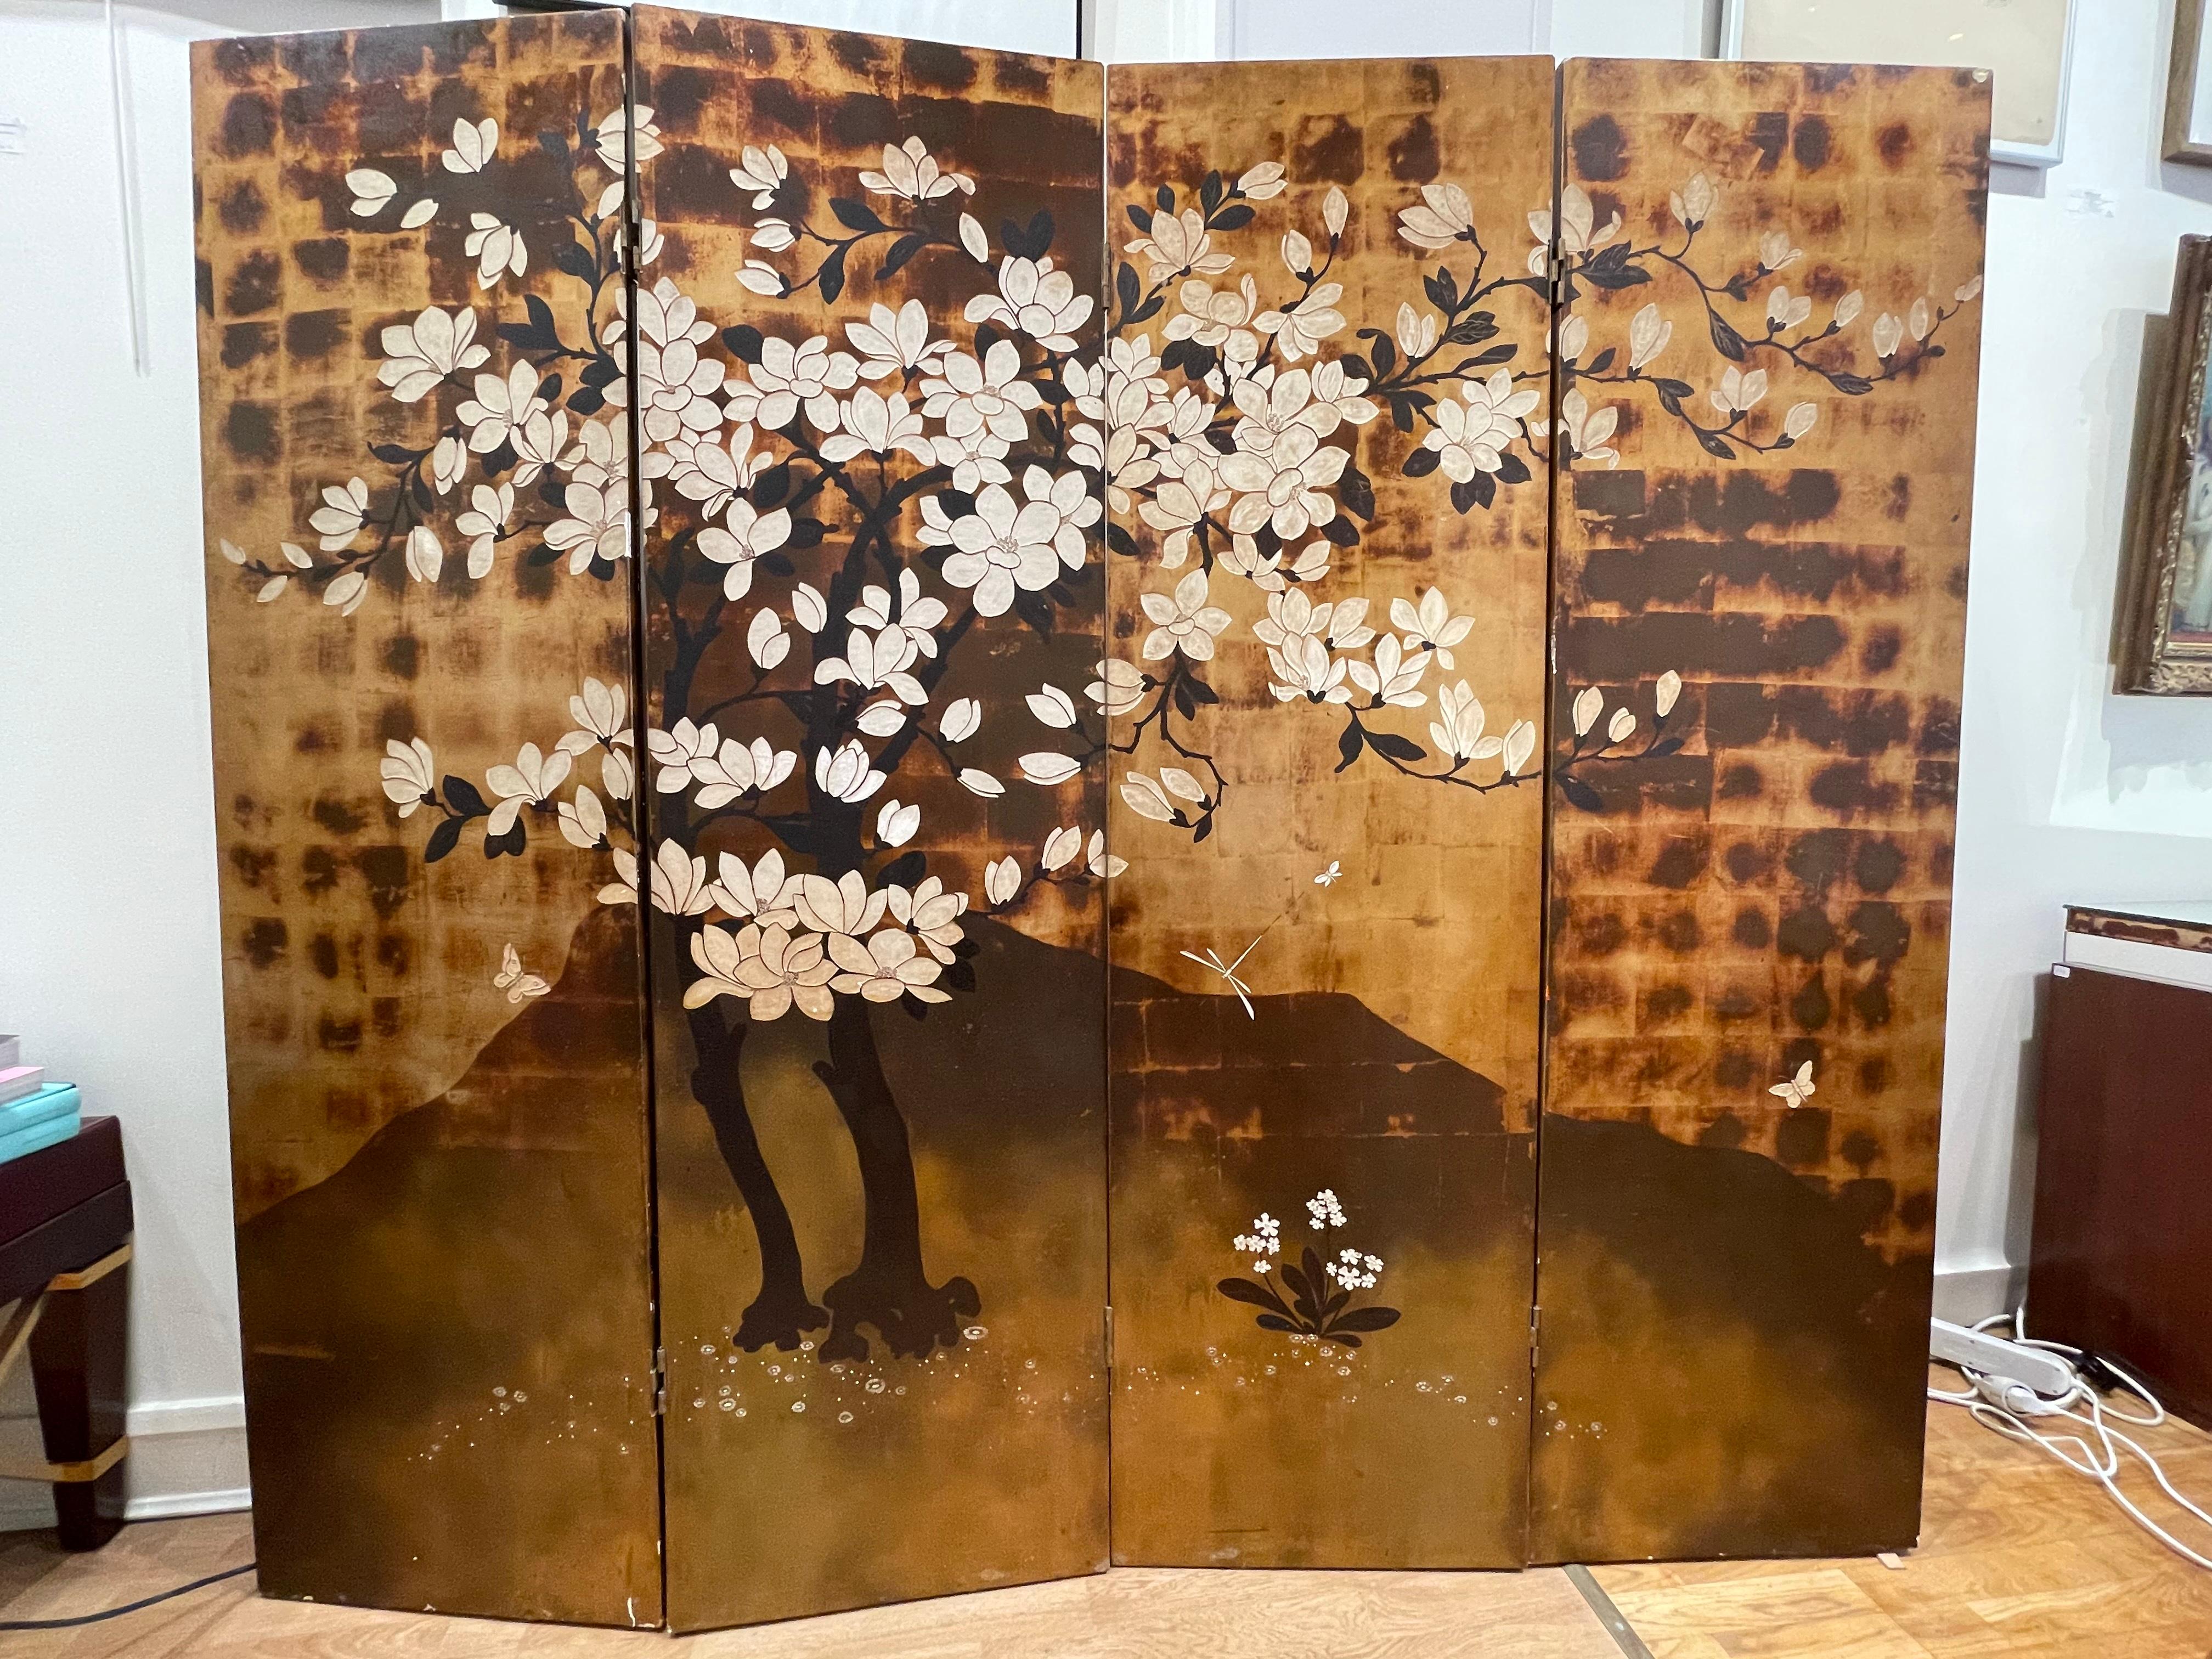 Exceptional 2-sided 4-panel lacquered screen by Pierre Bobot (French 1902-1974). Art Deco.
One side in color lacquer on a background of golded leaf with a decor of magnola flowers and insects. Signed and monogrammed bottom right.
On the back side,